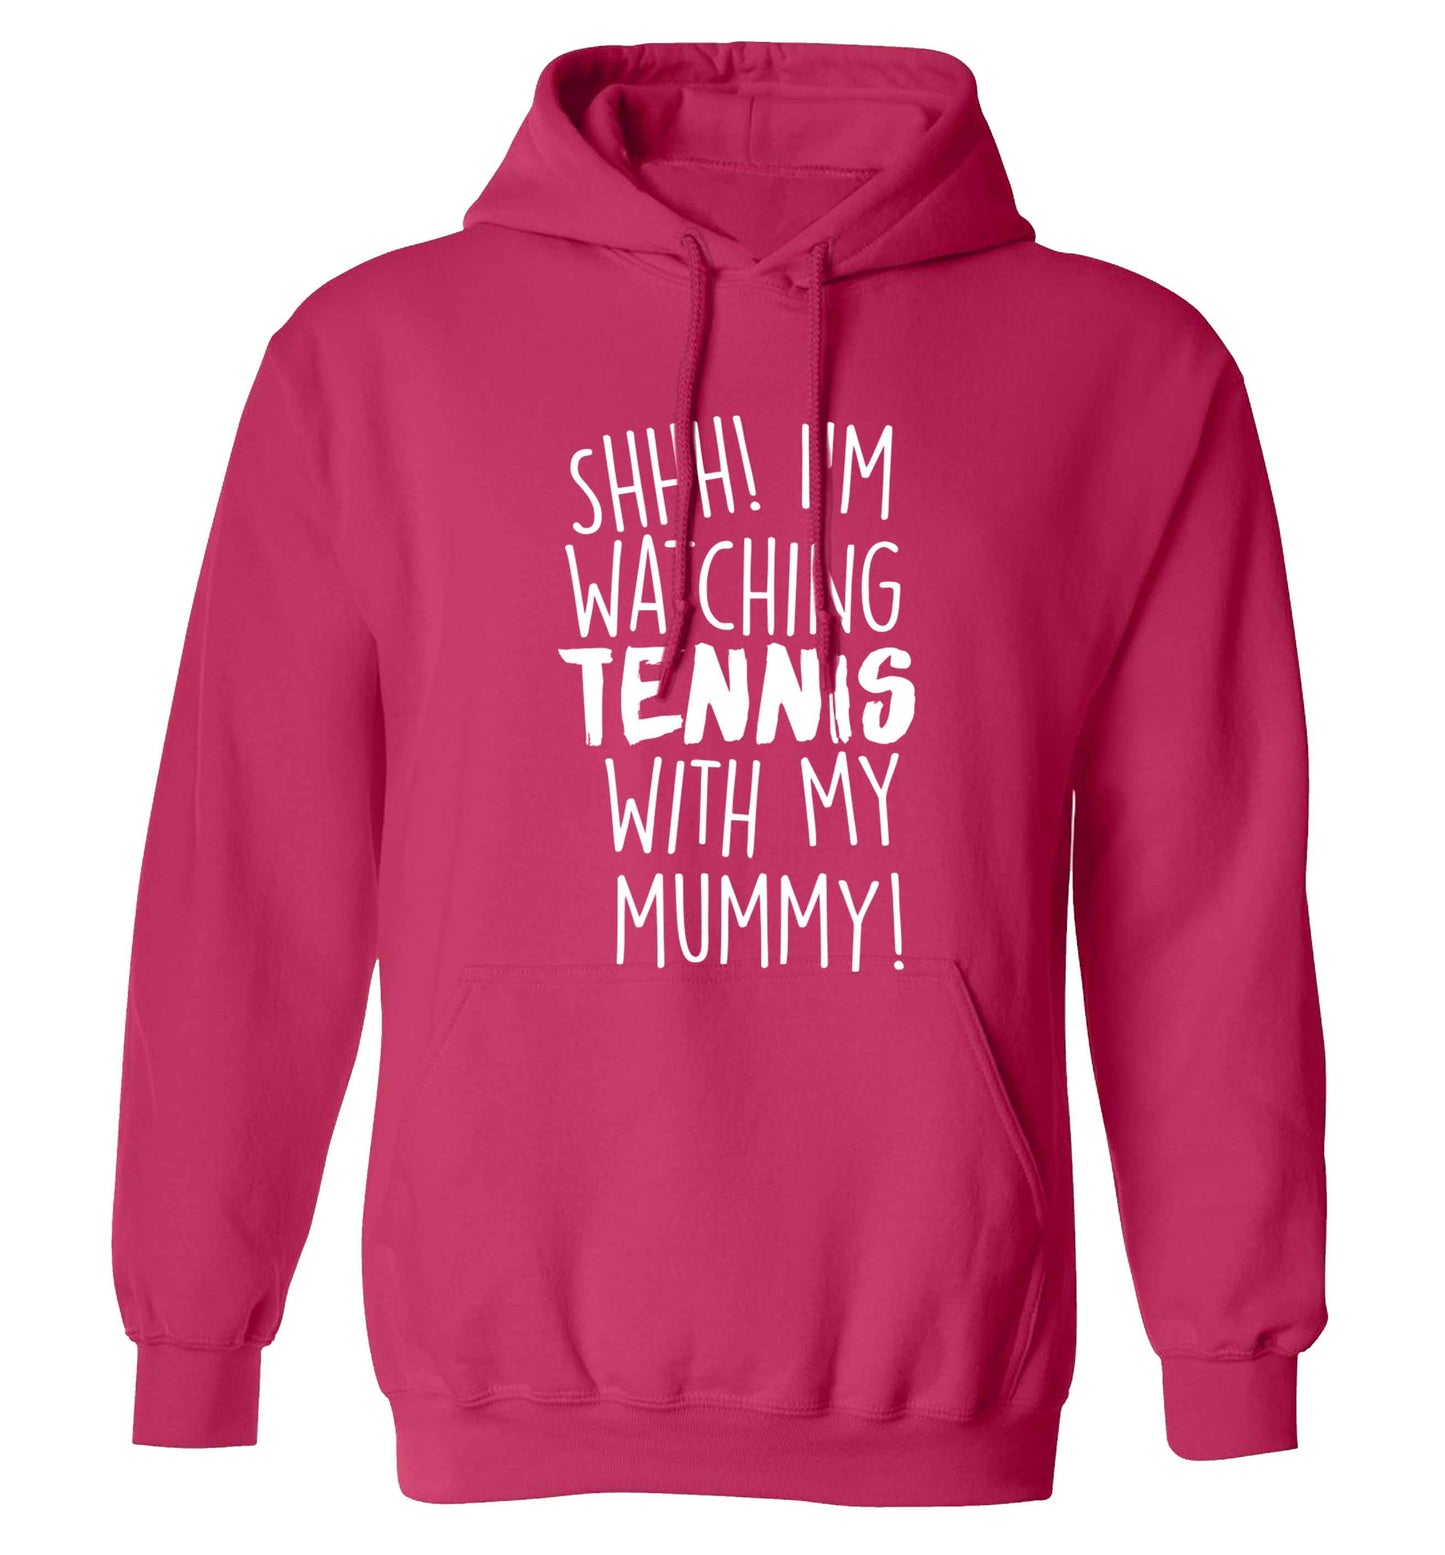 Shh! I'm watching tennis with my mummy! adults unisex pink hoodie 2XL